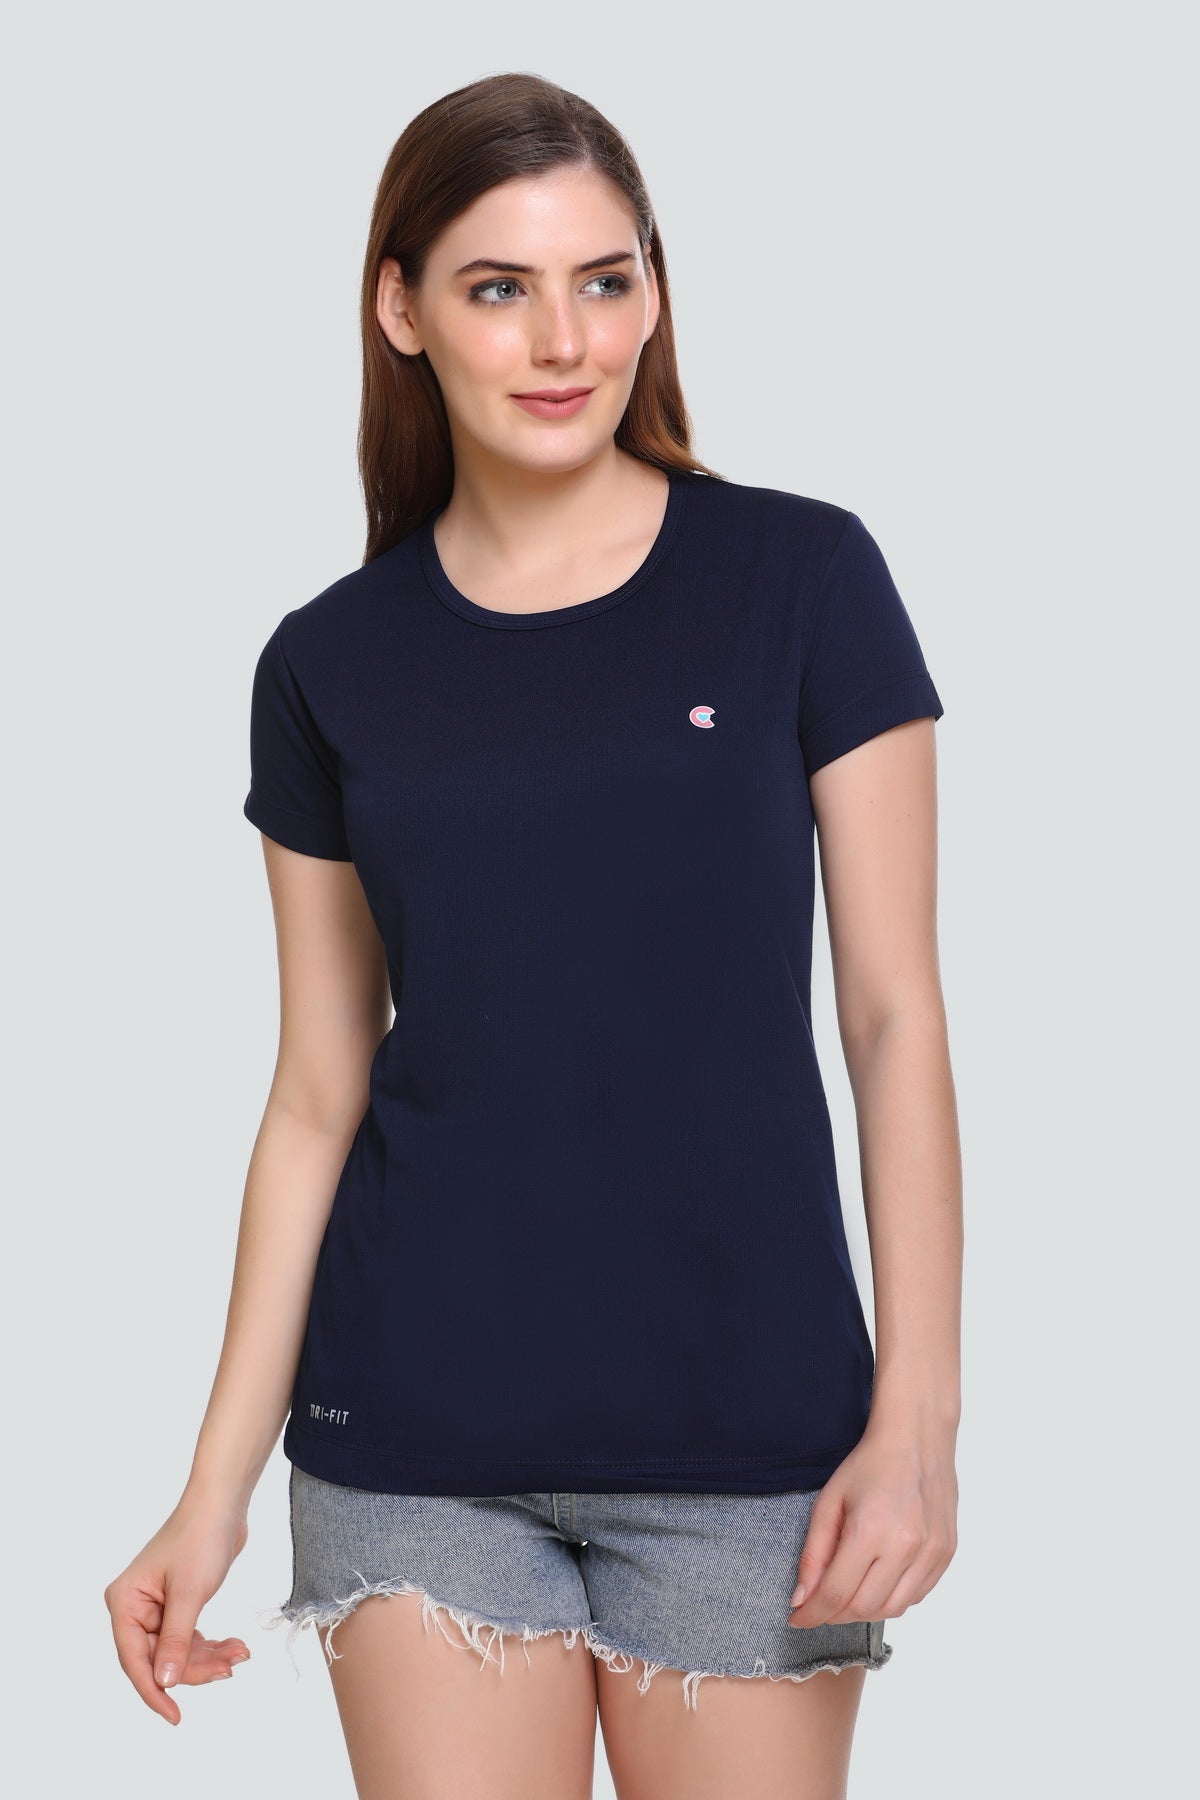 Stylish Navy Blue Cotton Half Sleeves Dri Fit T-shirts For Women Online In India